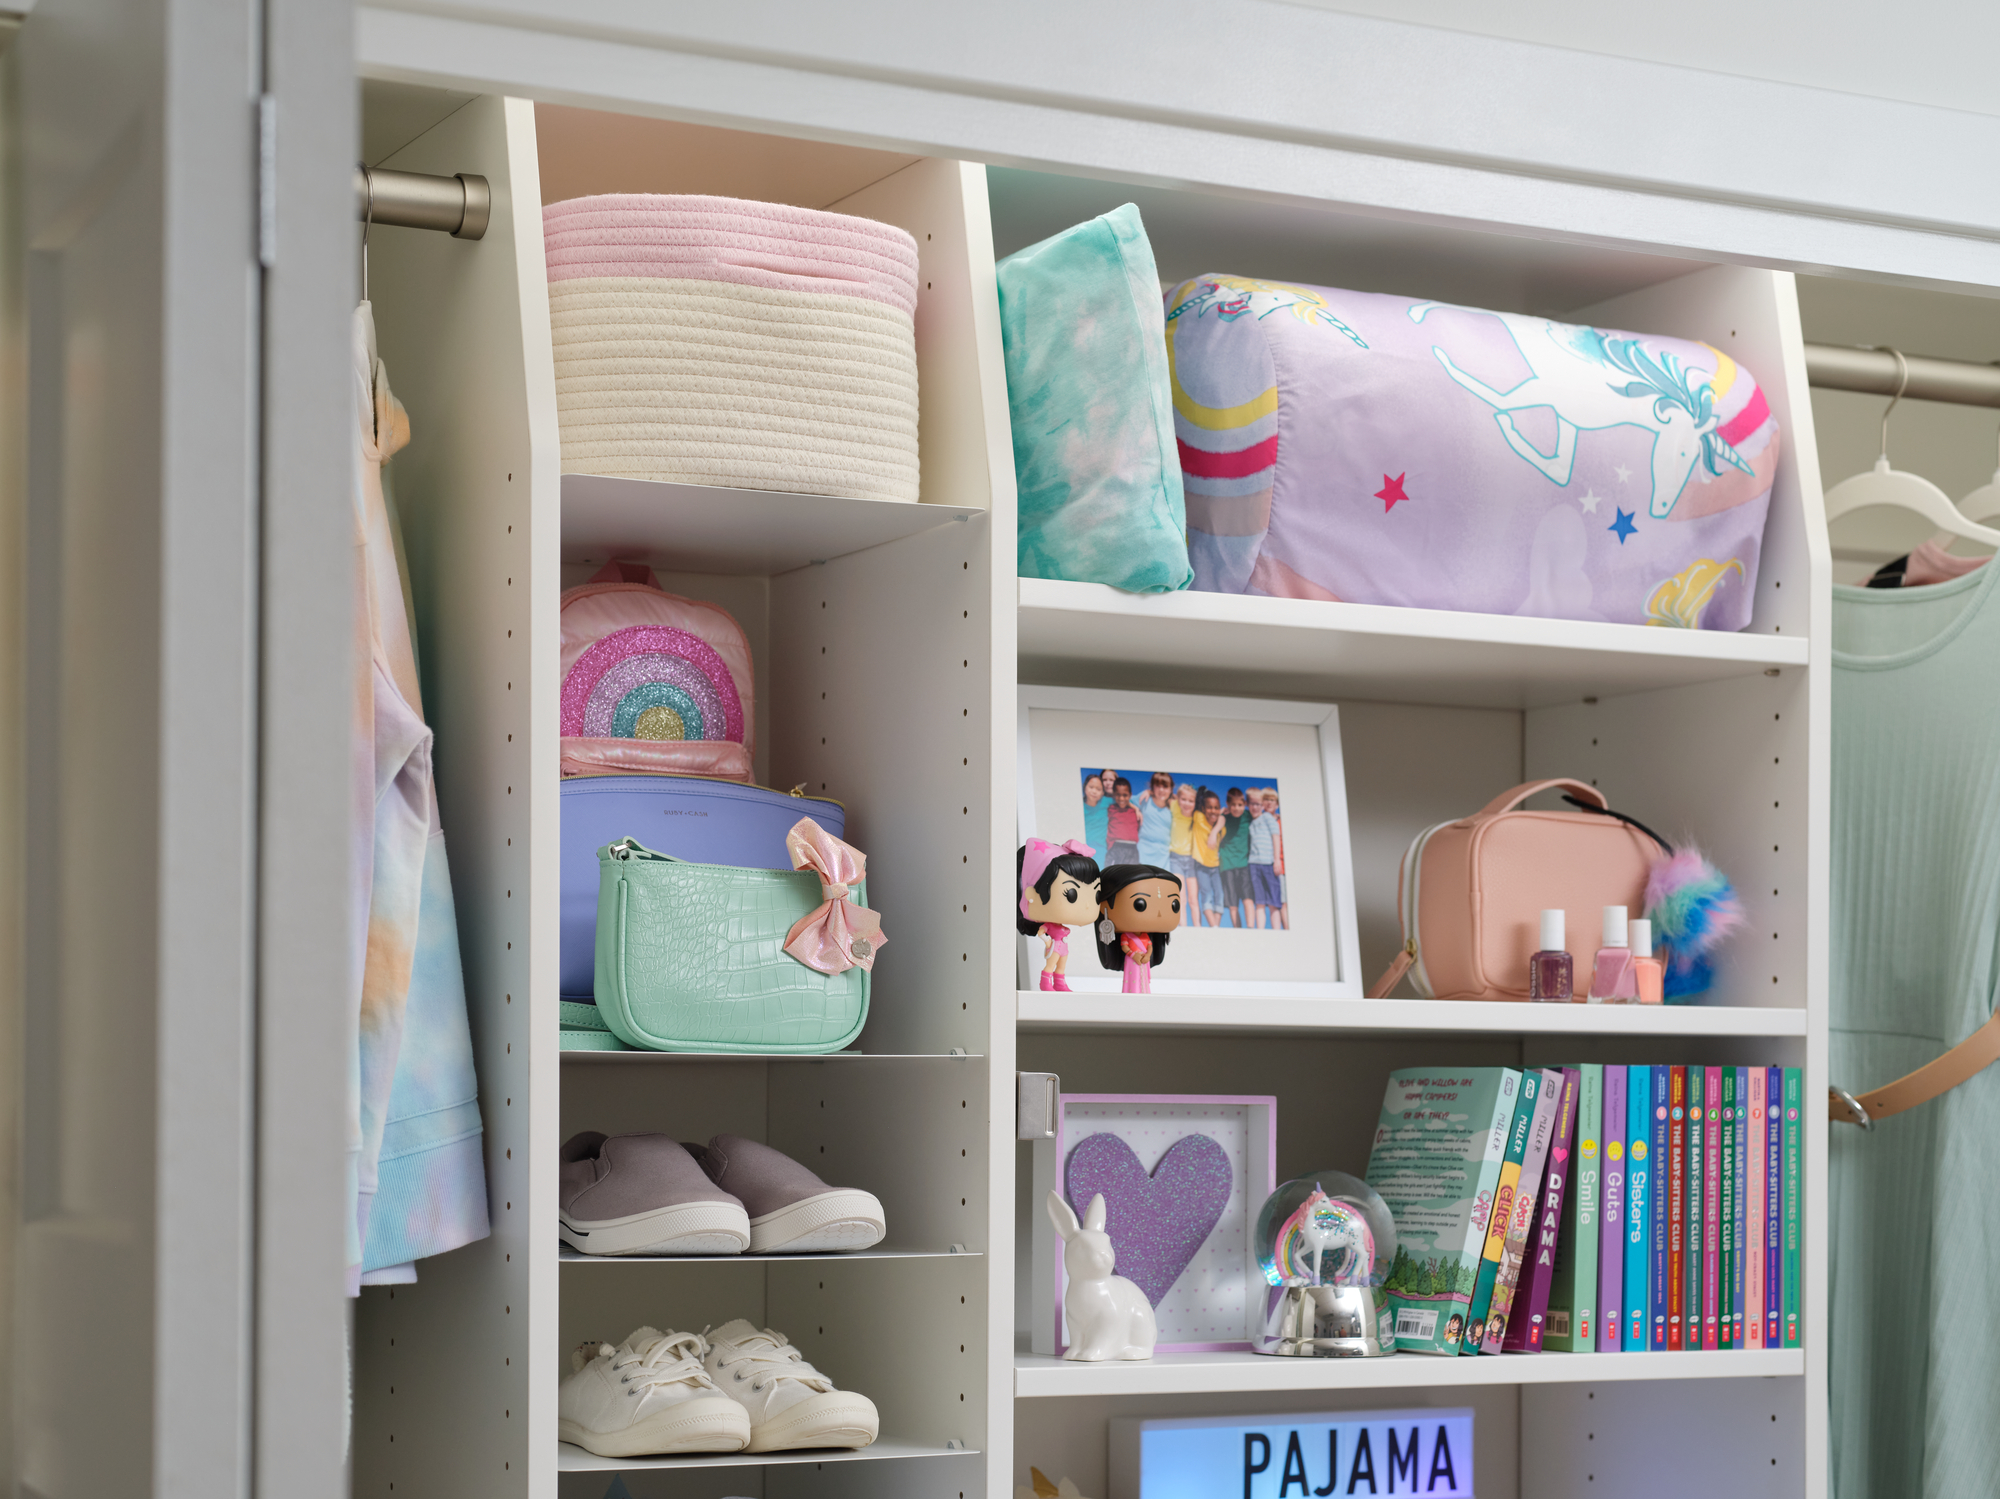 Store slumber party items with Inspired Closets custom organizers